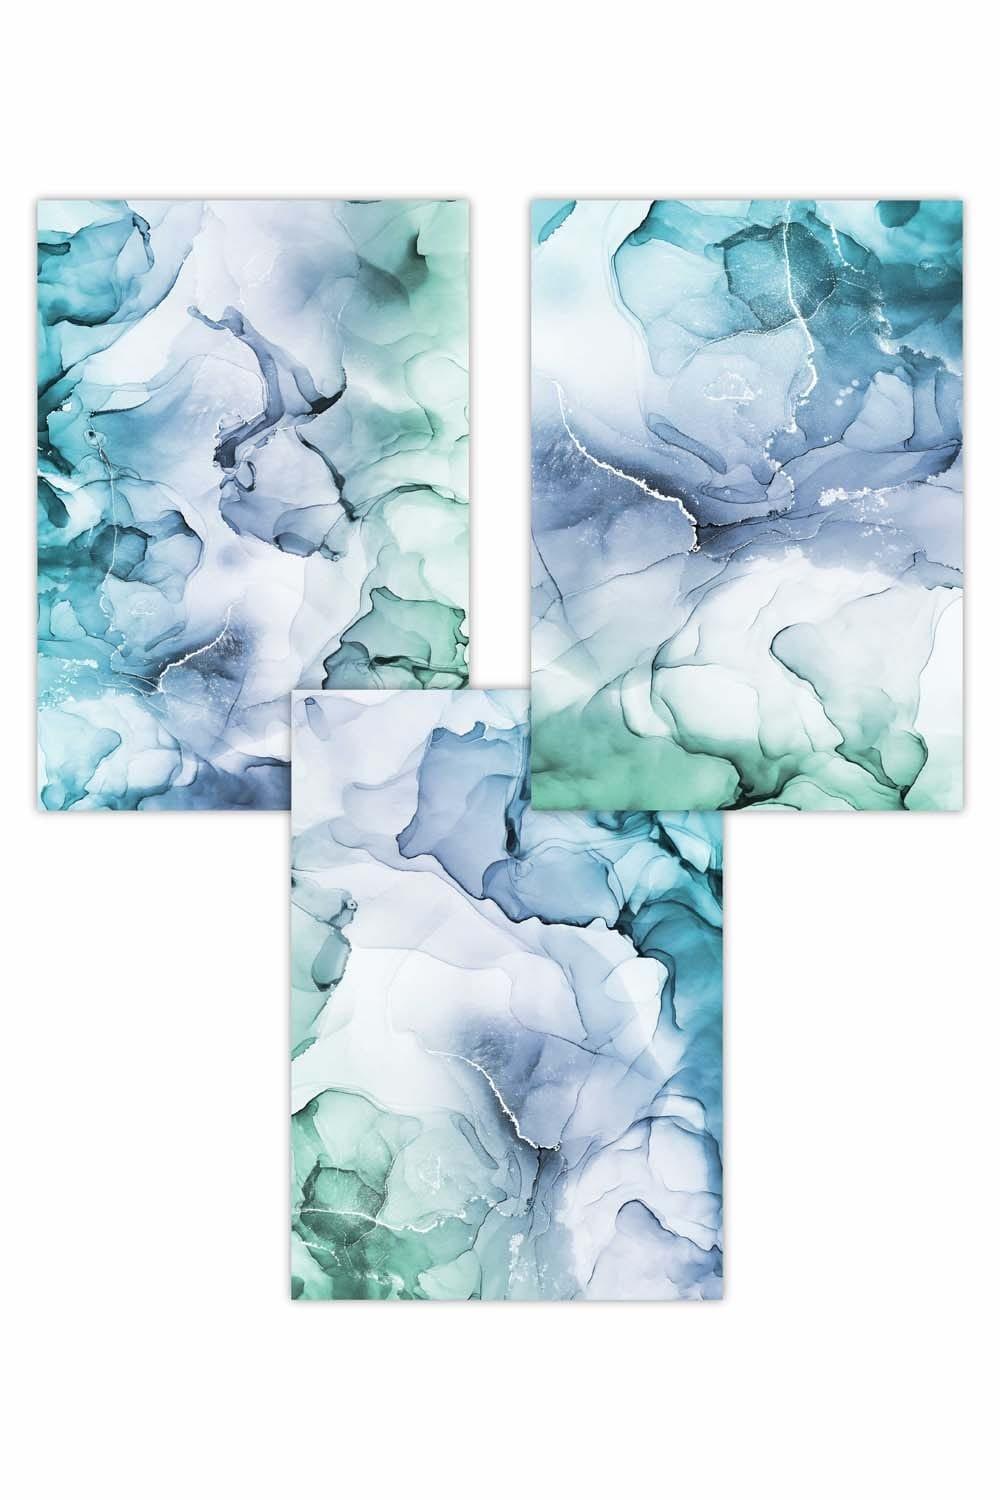 Set of 3 Abstract Floral Fluid in Blue Green and Purple Art Posters